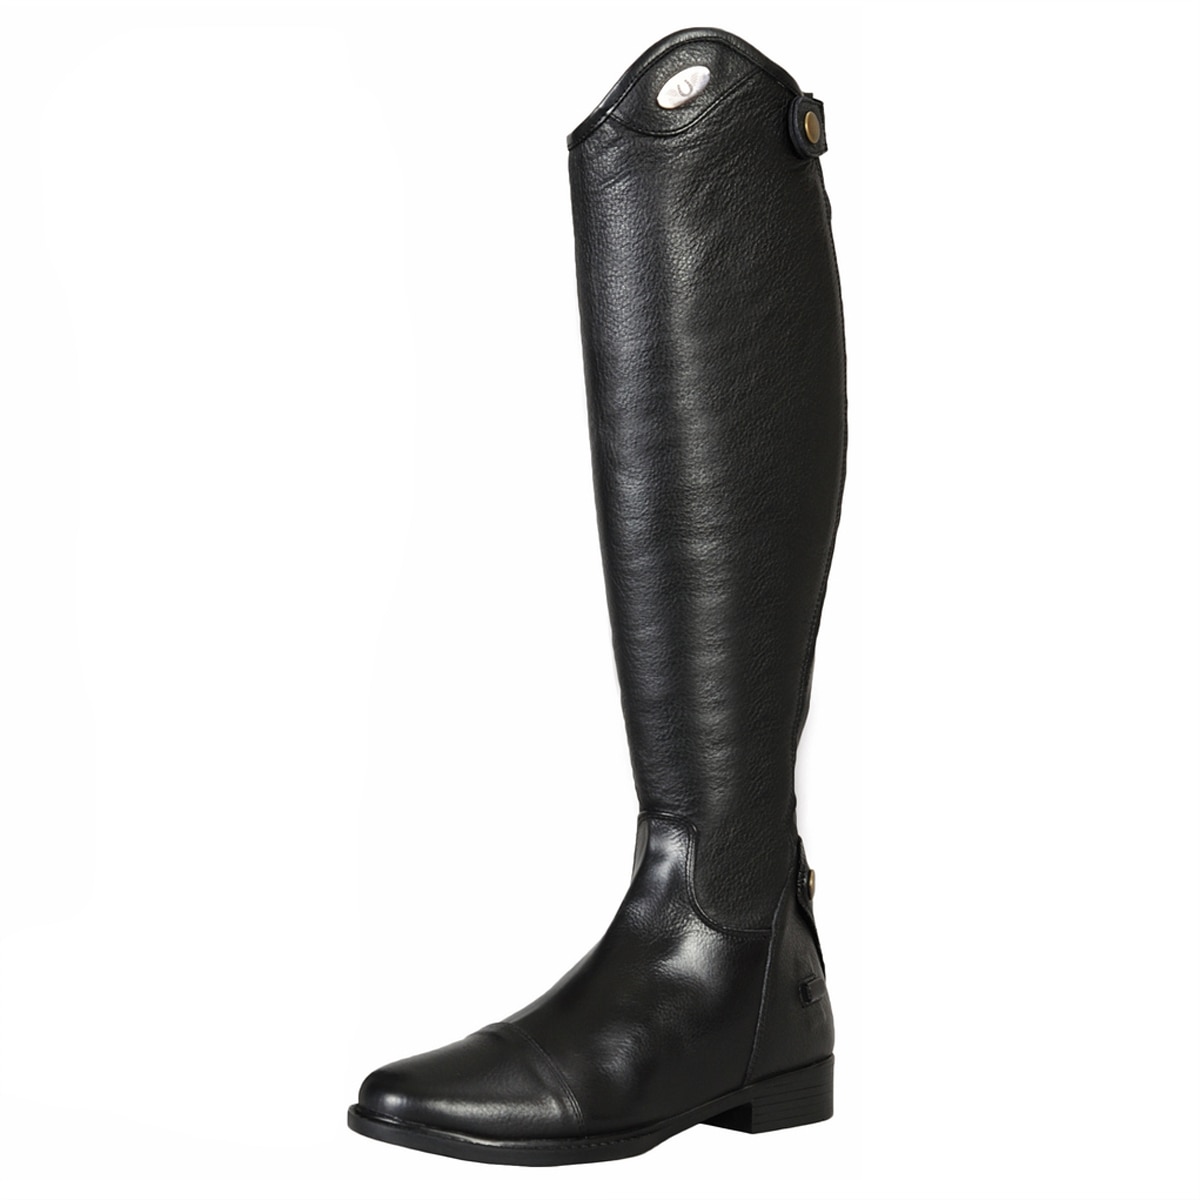 HKM Ladies New General Flexible Rubber Long Synthetic Leather Horse Riding Boots 